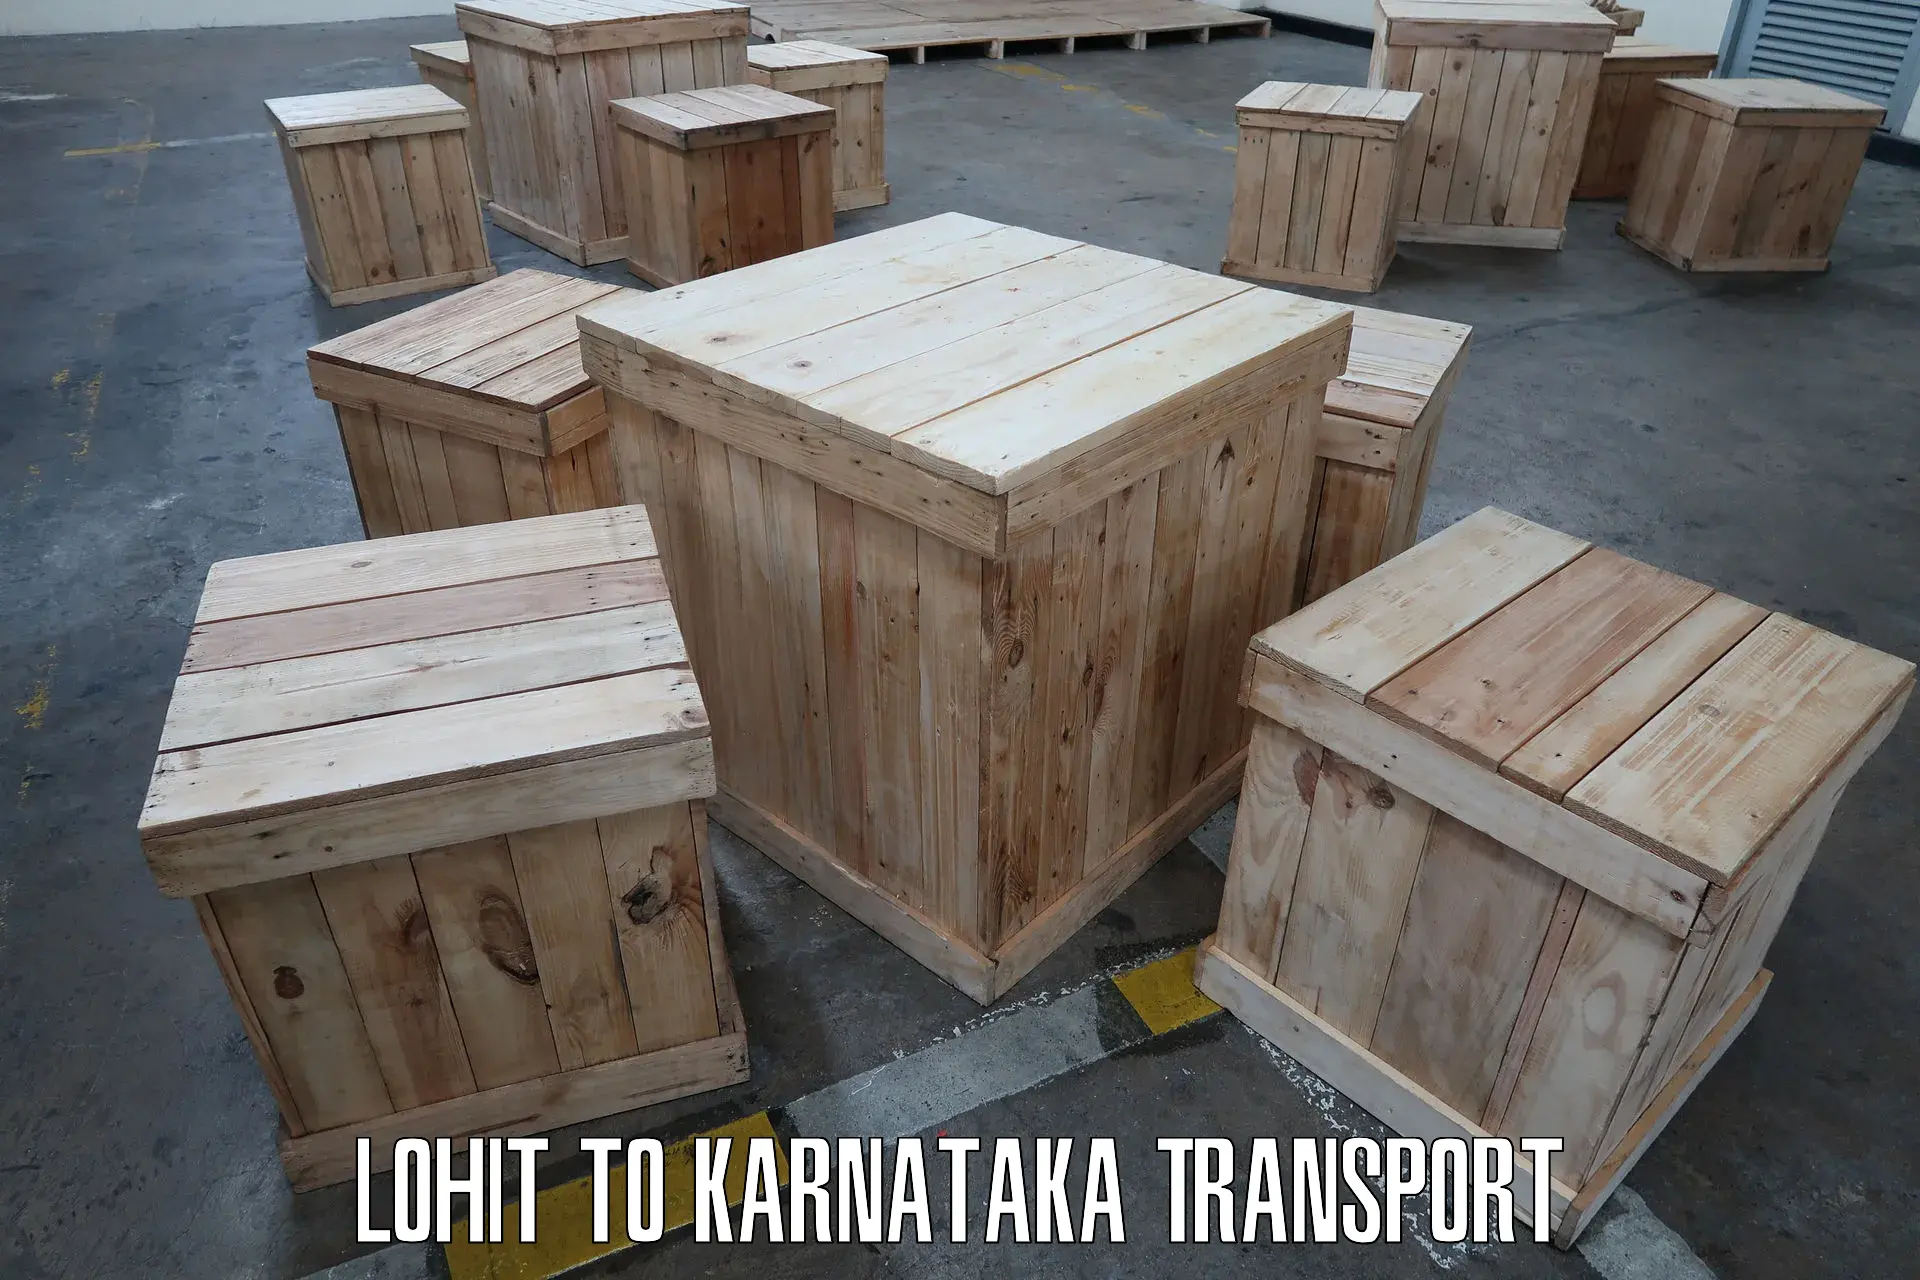 Container transport service Lohit to University of Agricultural Sciences Dharwad